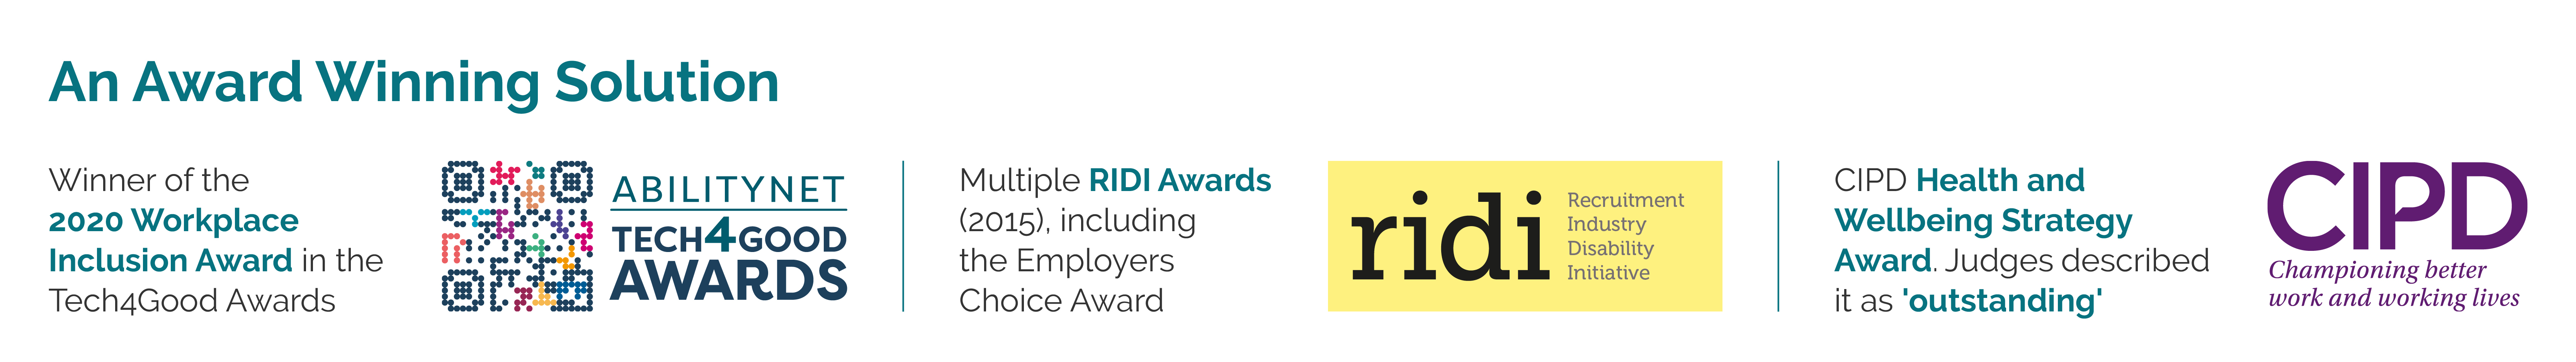 Winner of the 2020Workplace Inclusion Awards in the Tech4Good Awards; CIPD Health and Wellbeing Strategy Award, multiple RIDI Awards, including the Employers' Choice Award, judges described it as outstanding